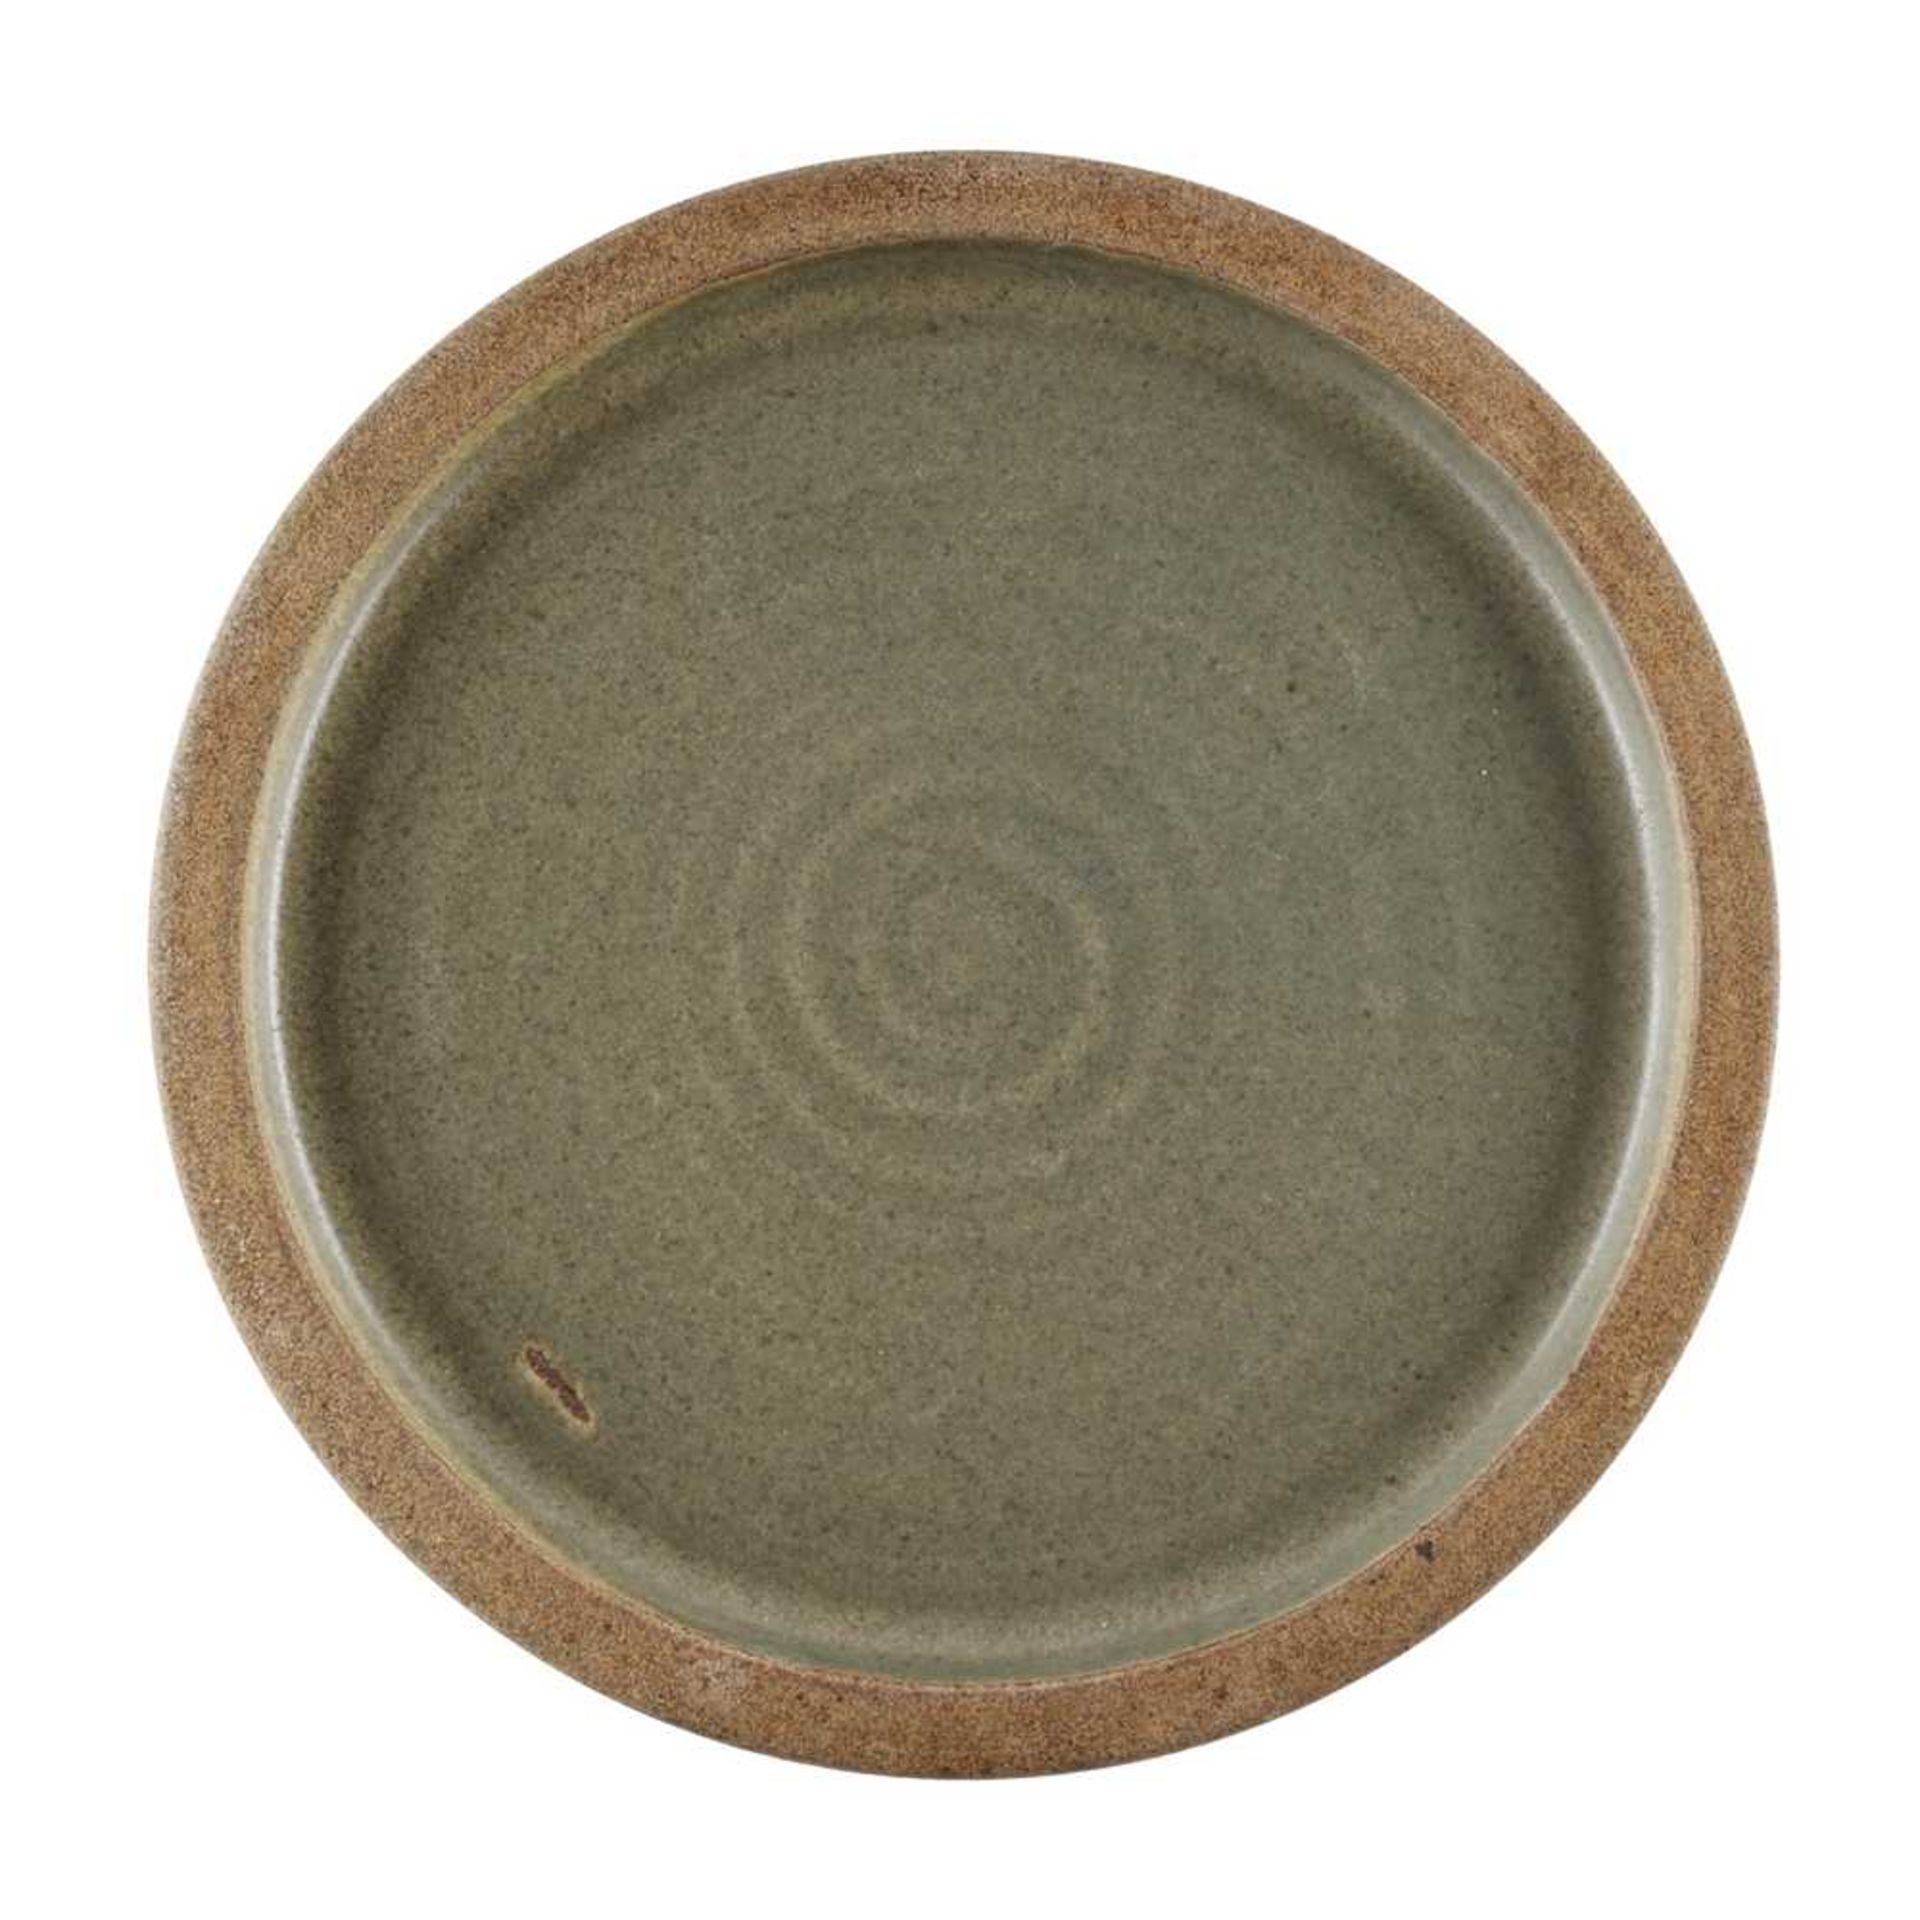 LEACH POTTERY COLLECTION OF TABLEWARE - Image 13 of 13